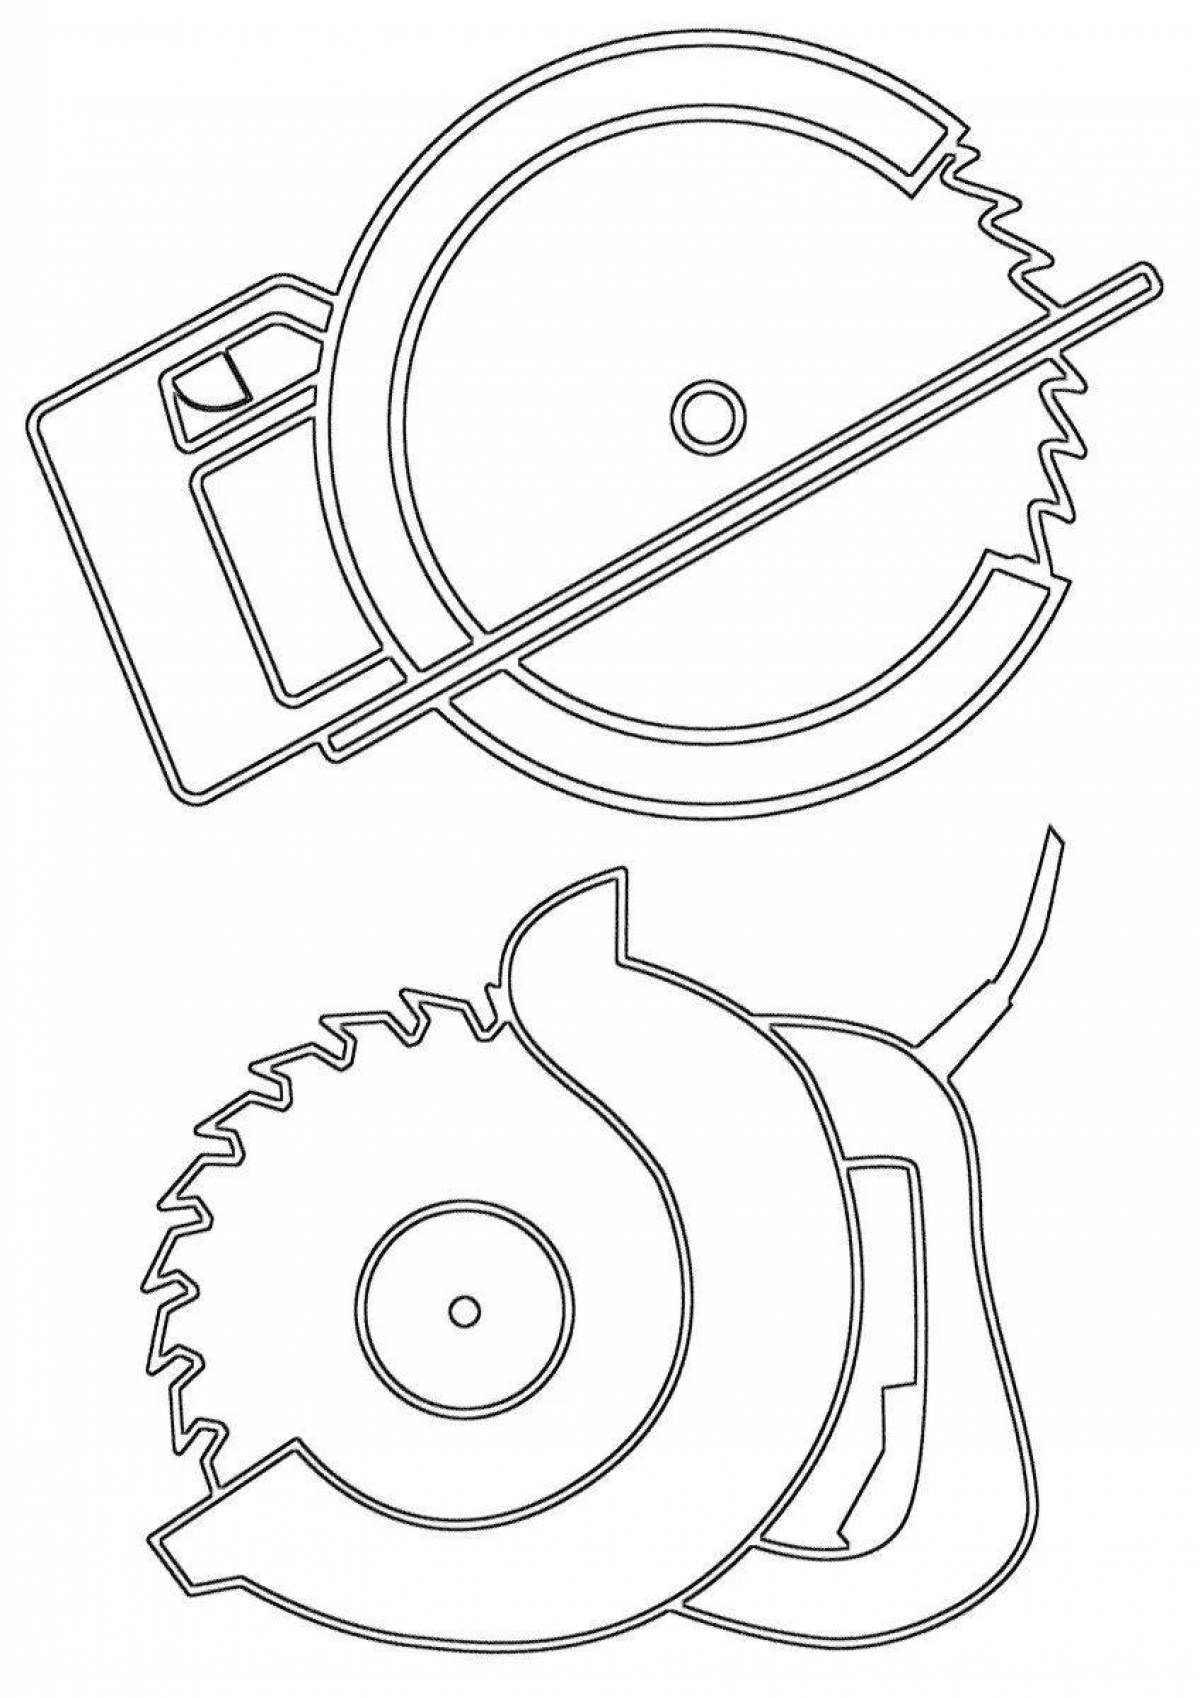 Crazy Chainsaw Coloring Page